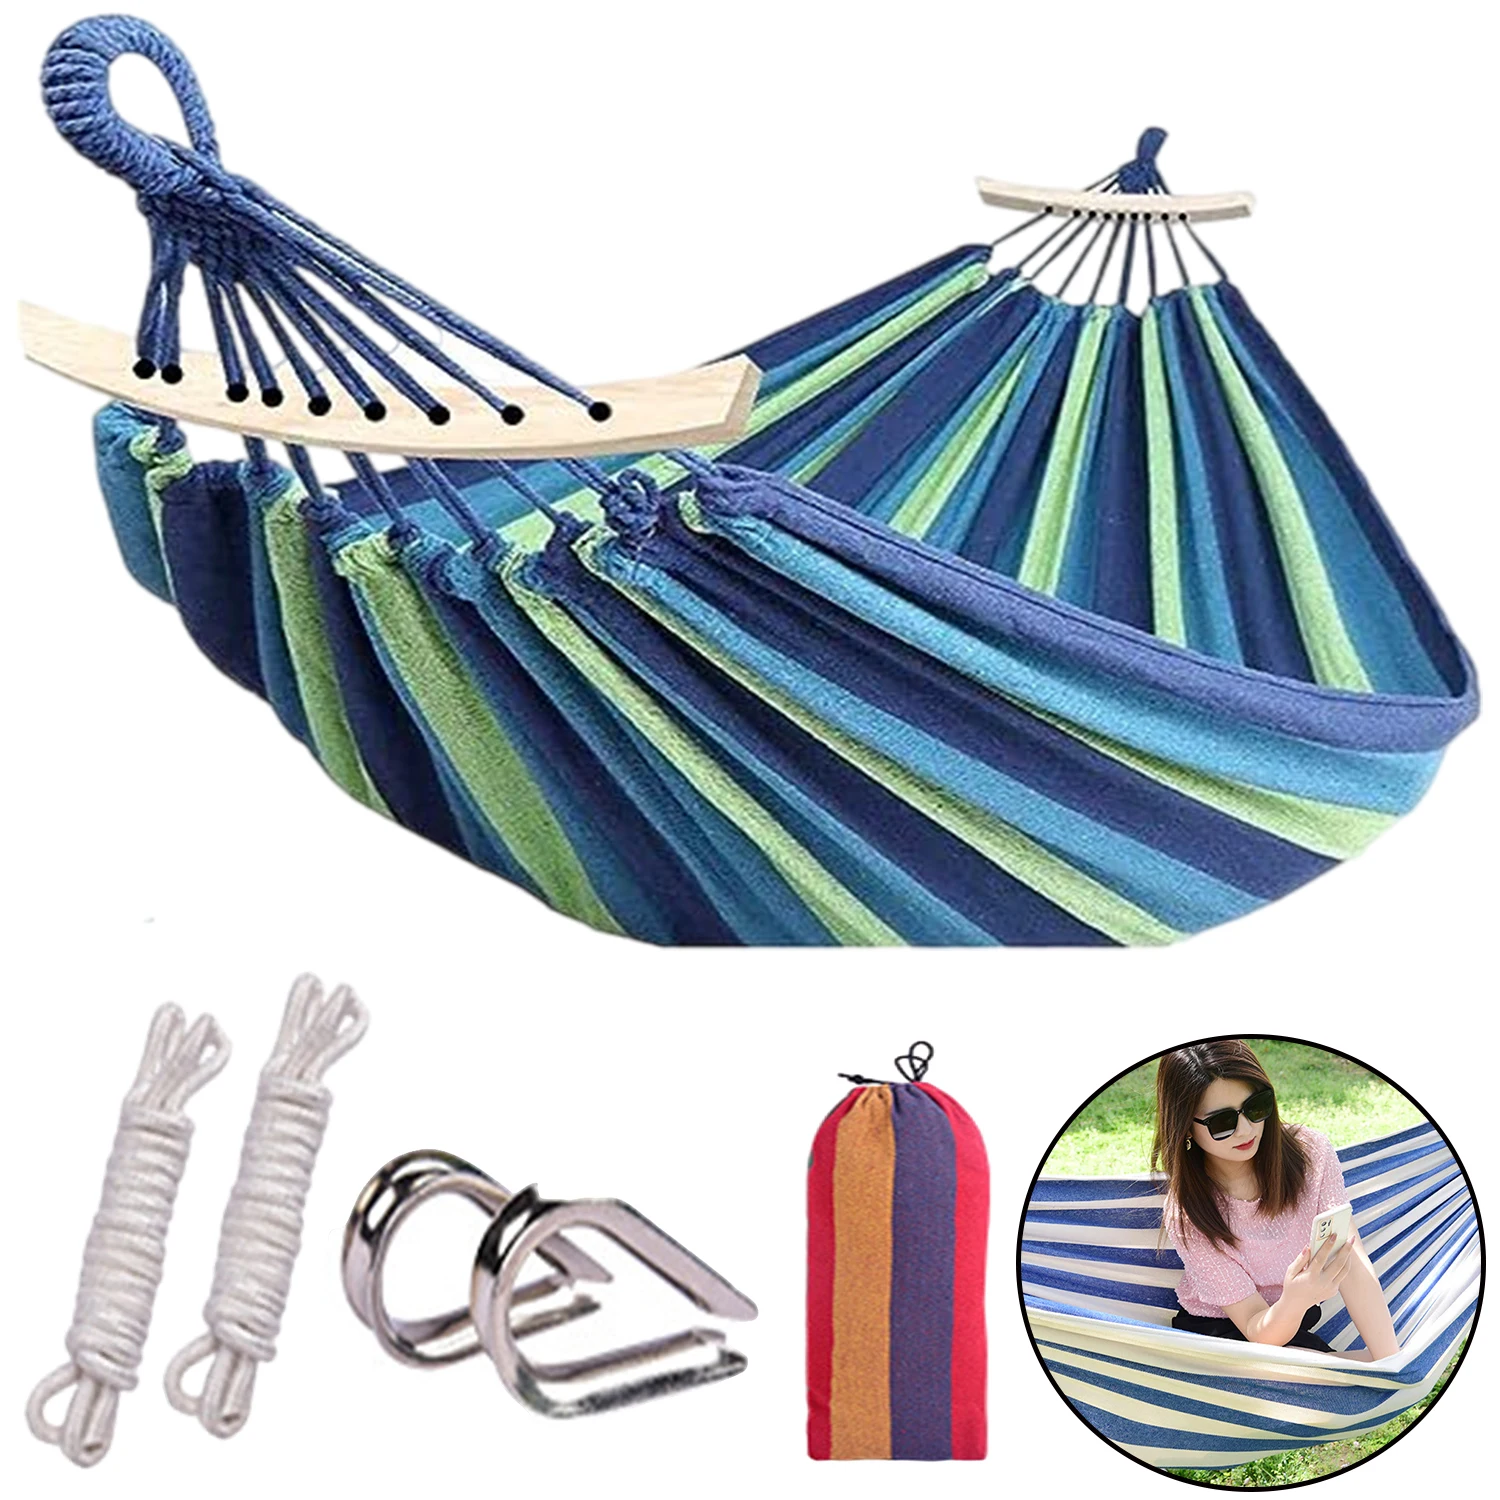 

Hammock,Single or Double Person Canvas Portable Camping Hammocks with Carrying Bag for Home,Travel,Patio,Garden,Outdoors,Hiking